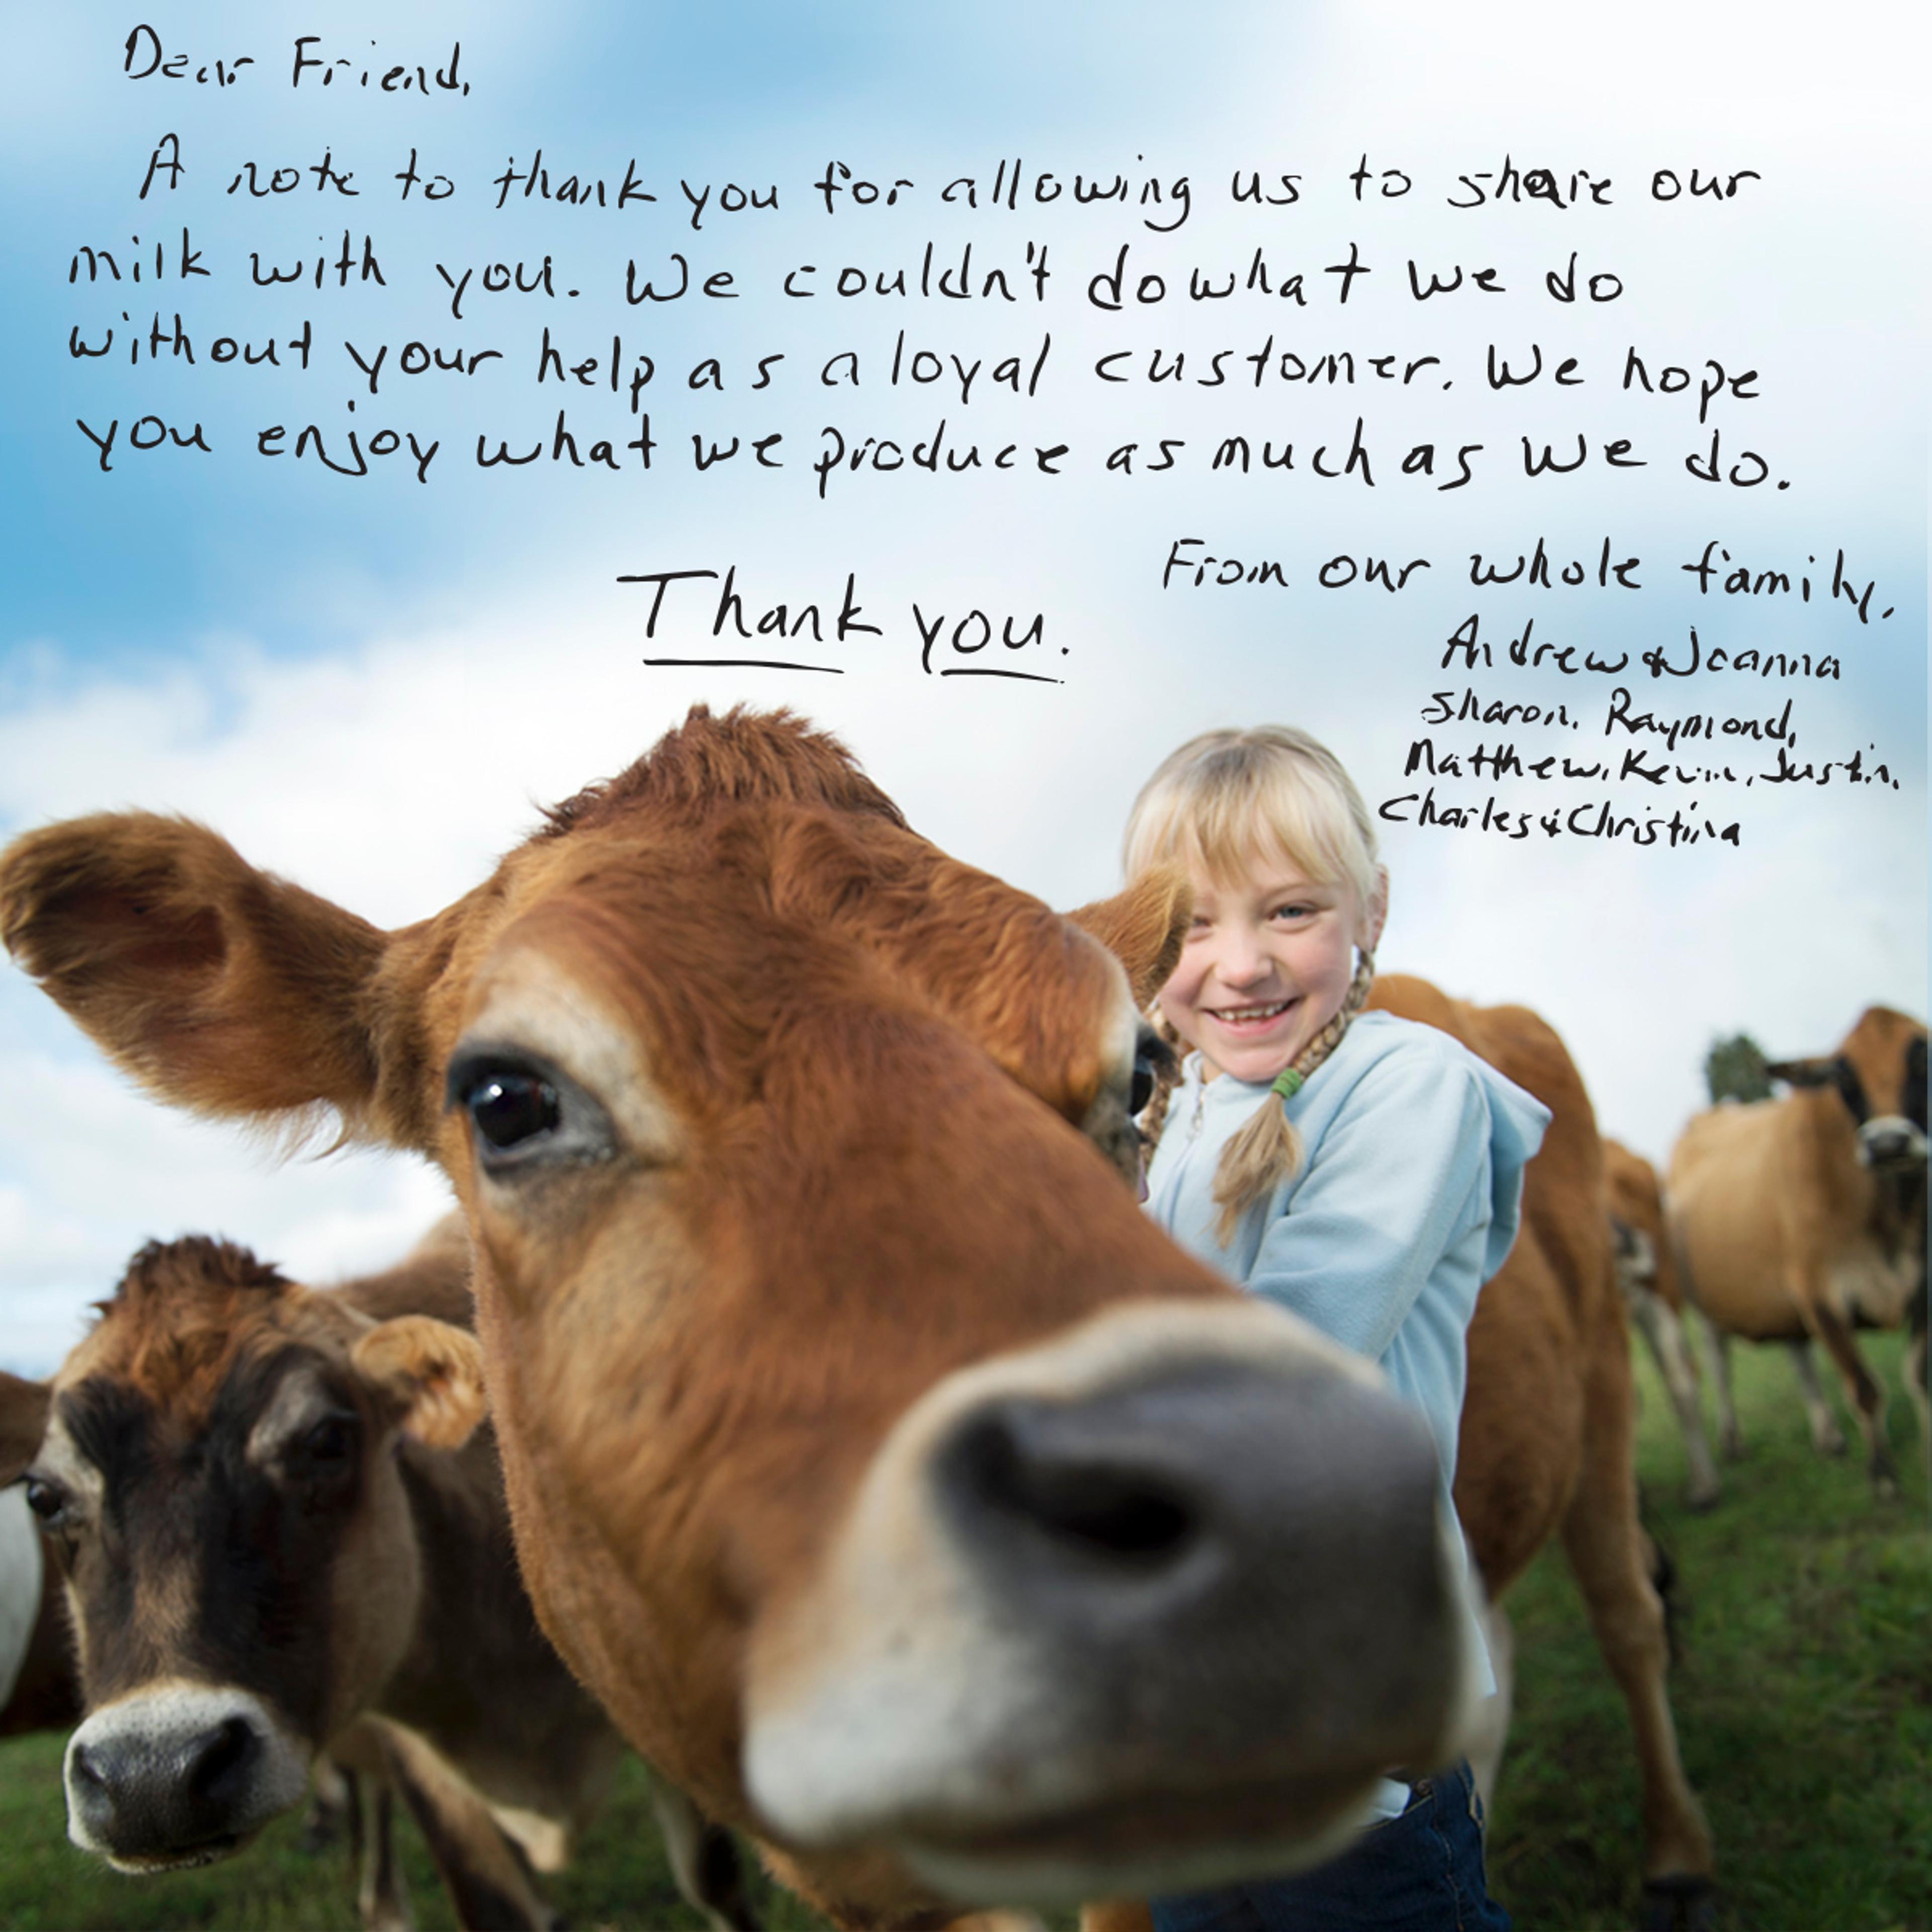 A farm family says thank you for allowing us to share our milk with you.